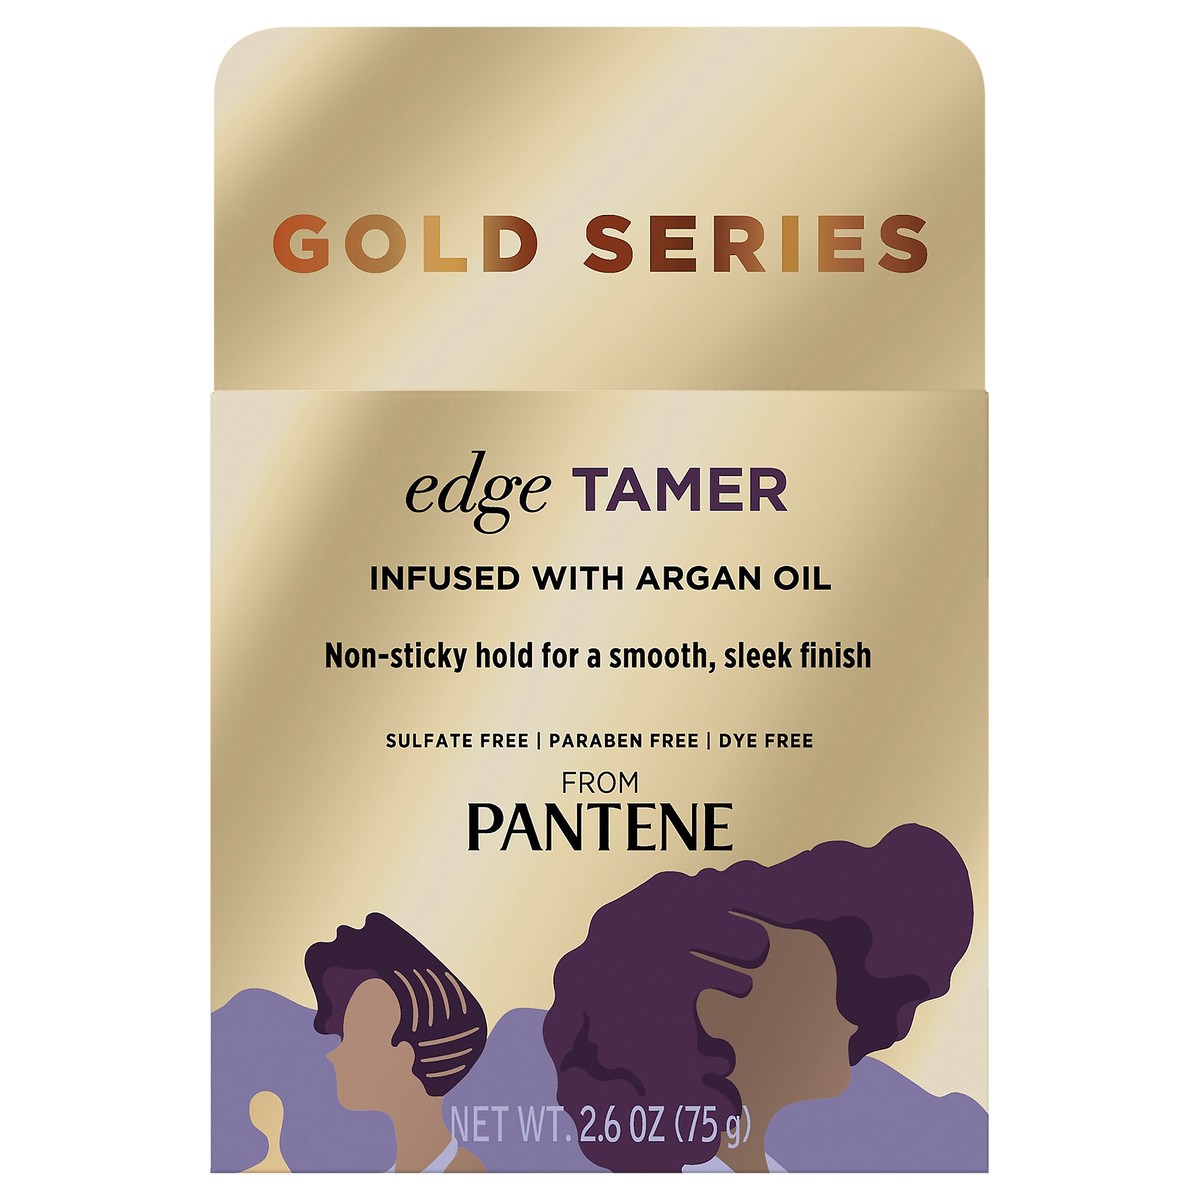 slide 2 of 11, Pantene Gold Series from Pantene Sulfate-Free Edge Tamer Treatment with Argan Oil, Non-Sticky Edge Control, 2.6 fl oz, 2.6 oz